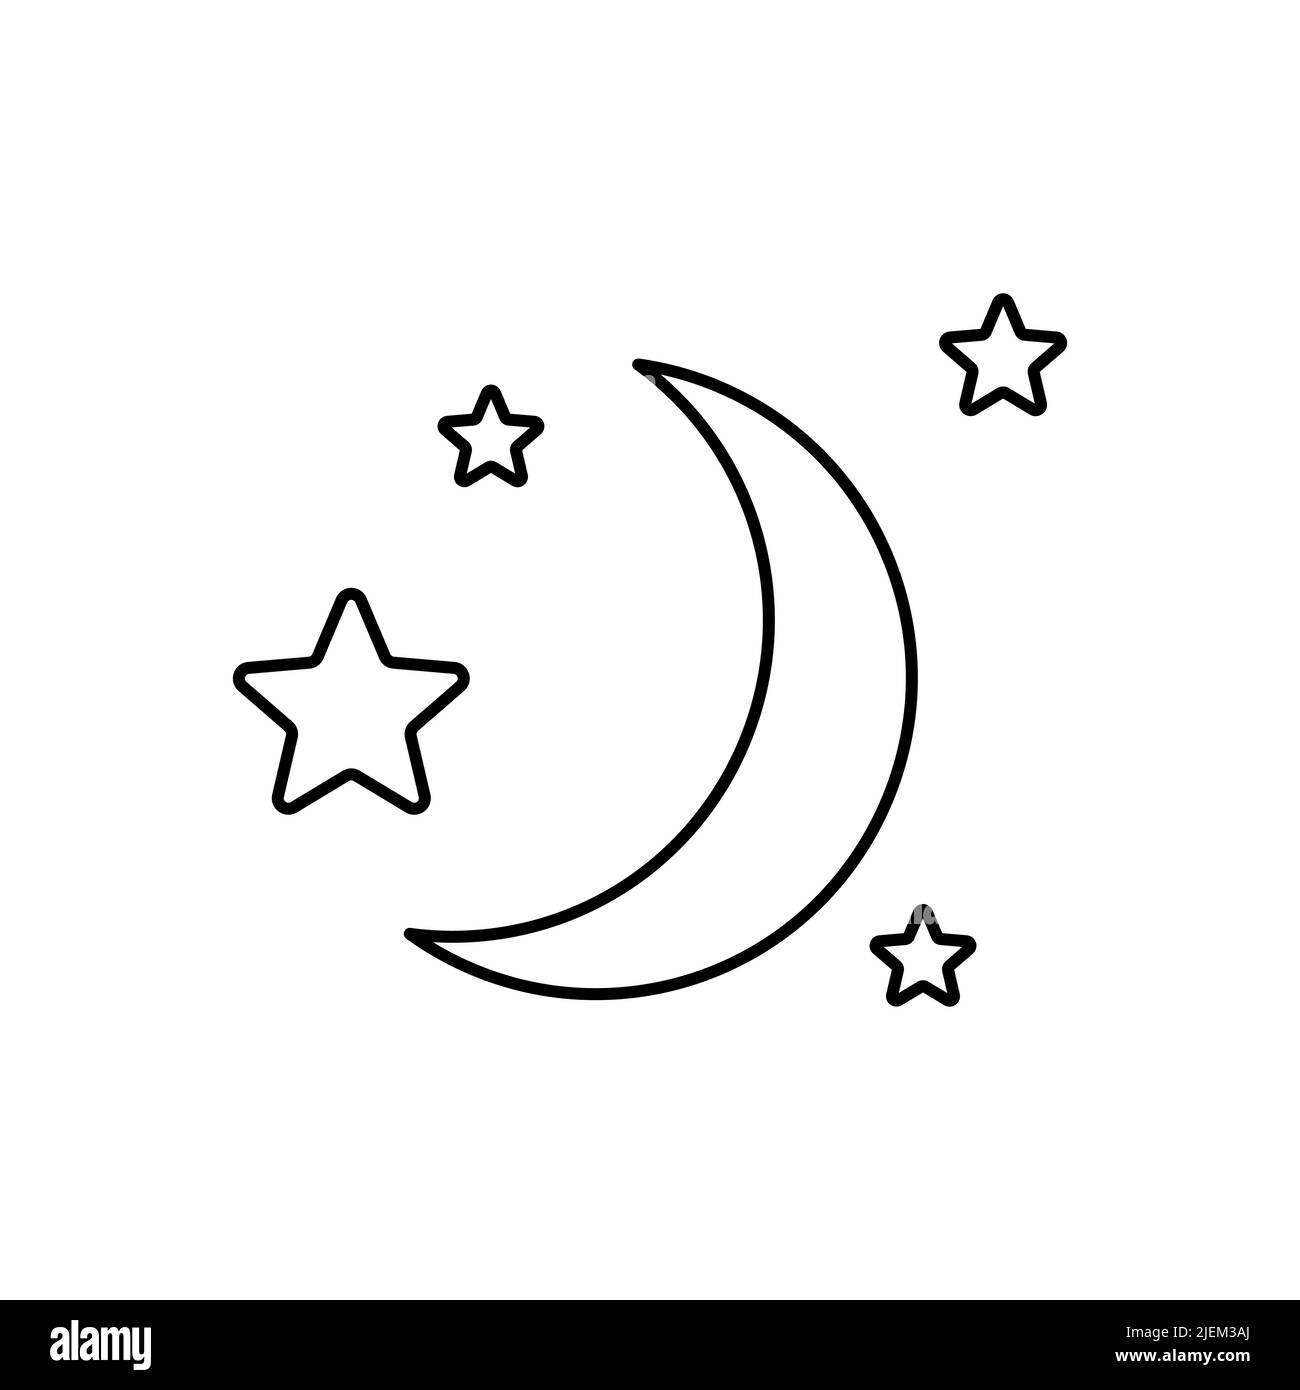 Moon icon. Black icon of moon and stars. Vector illustration. Linear moon icon isolated Stock Vector